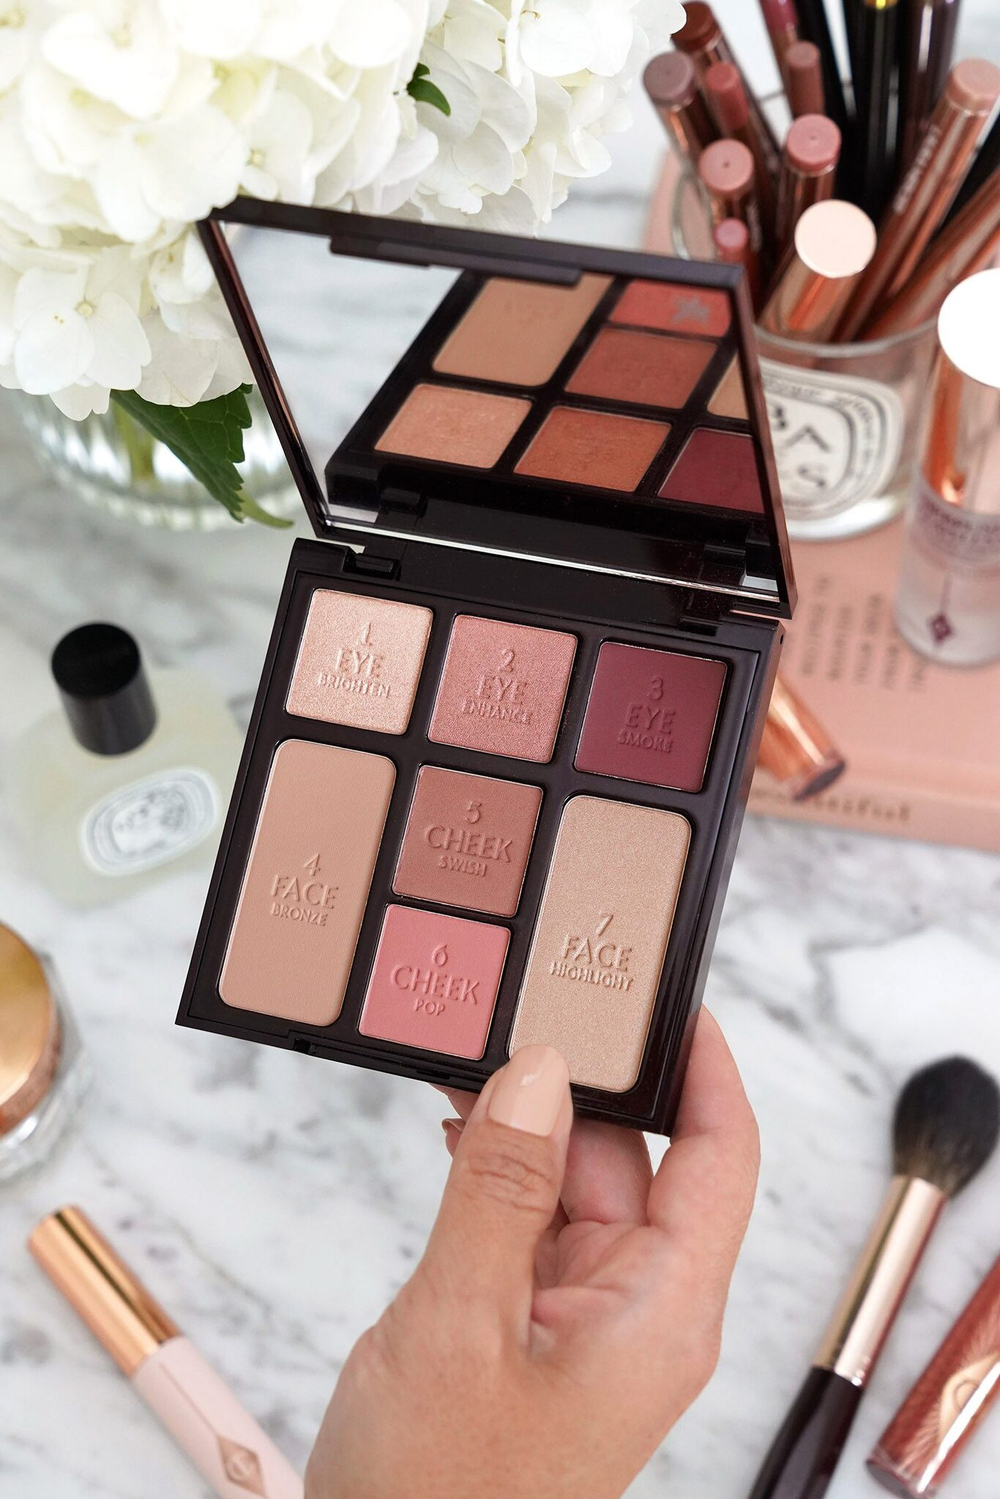 Charlotte Tilbury Instant Look in a Palette - Sunset Dreamscape